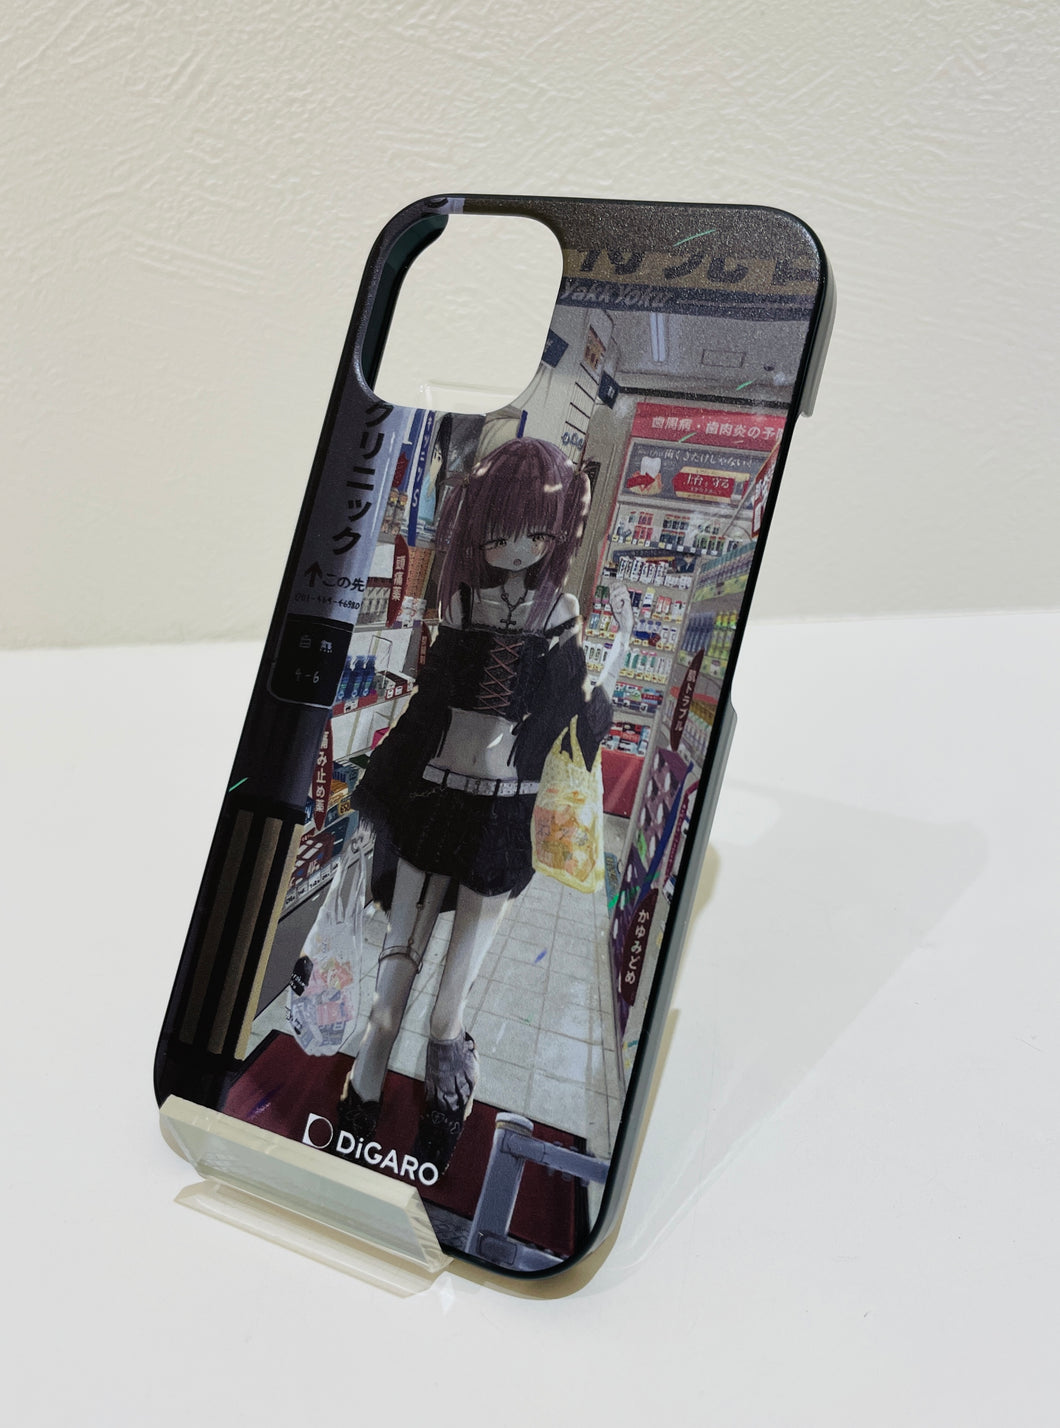 "I want to quickly become okay." Shina DiGARO Limited Smartphone Case -AQUOS Series-